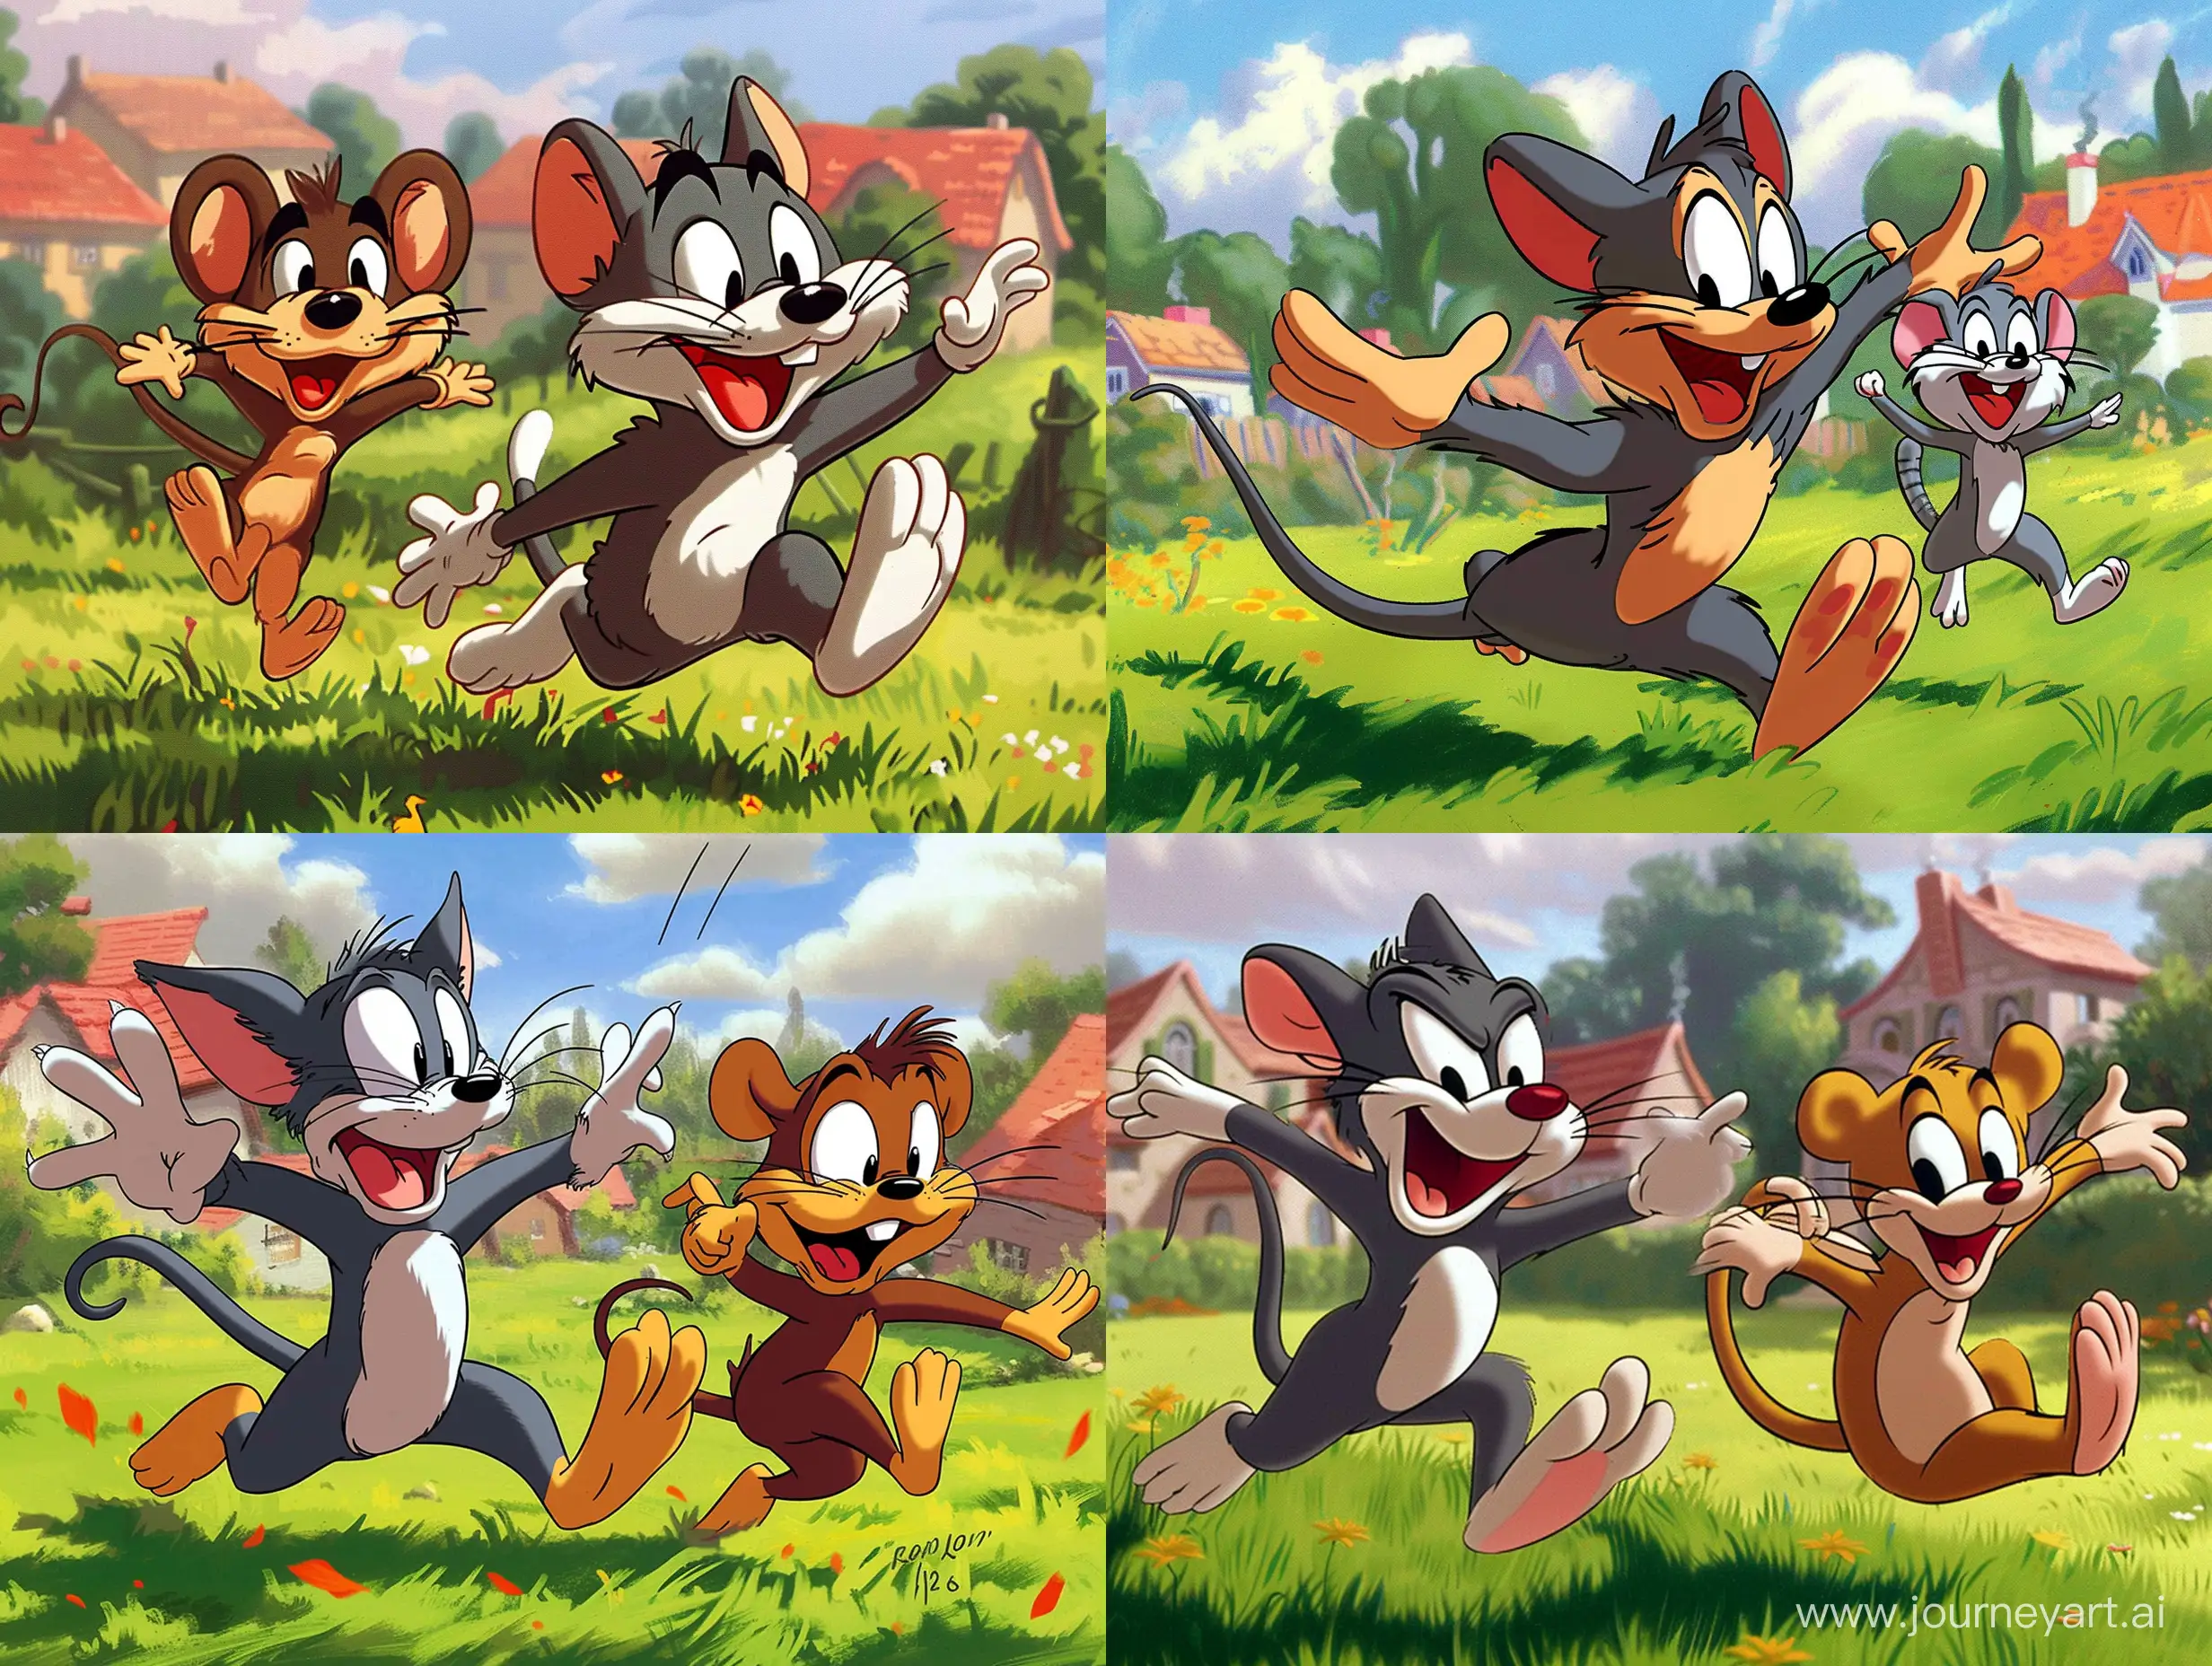 Tom-and-Jerry-Playful-Chase-in-Grassy-Field